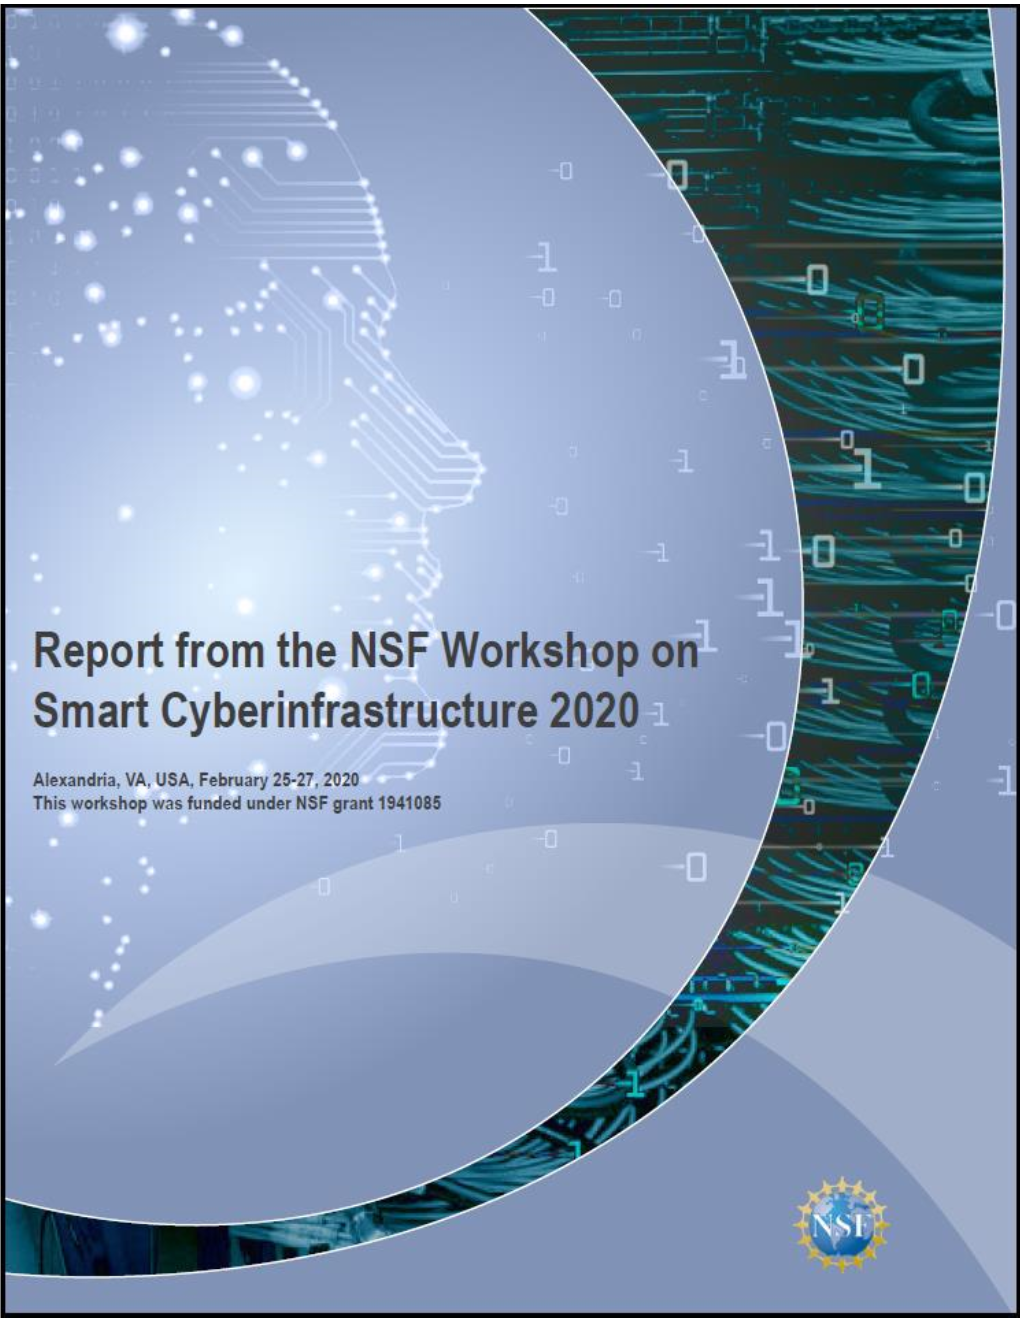 Report from the NSF Workshop on Smart Cyberinfrastructure 2020